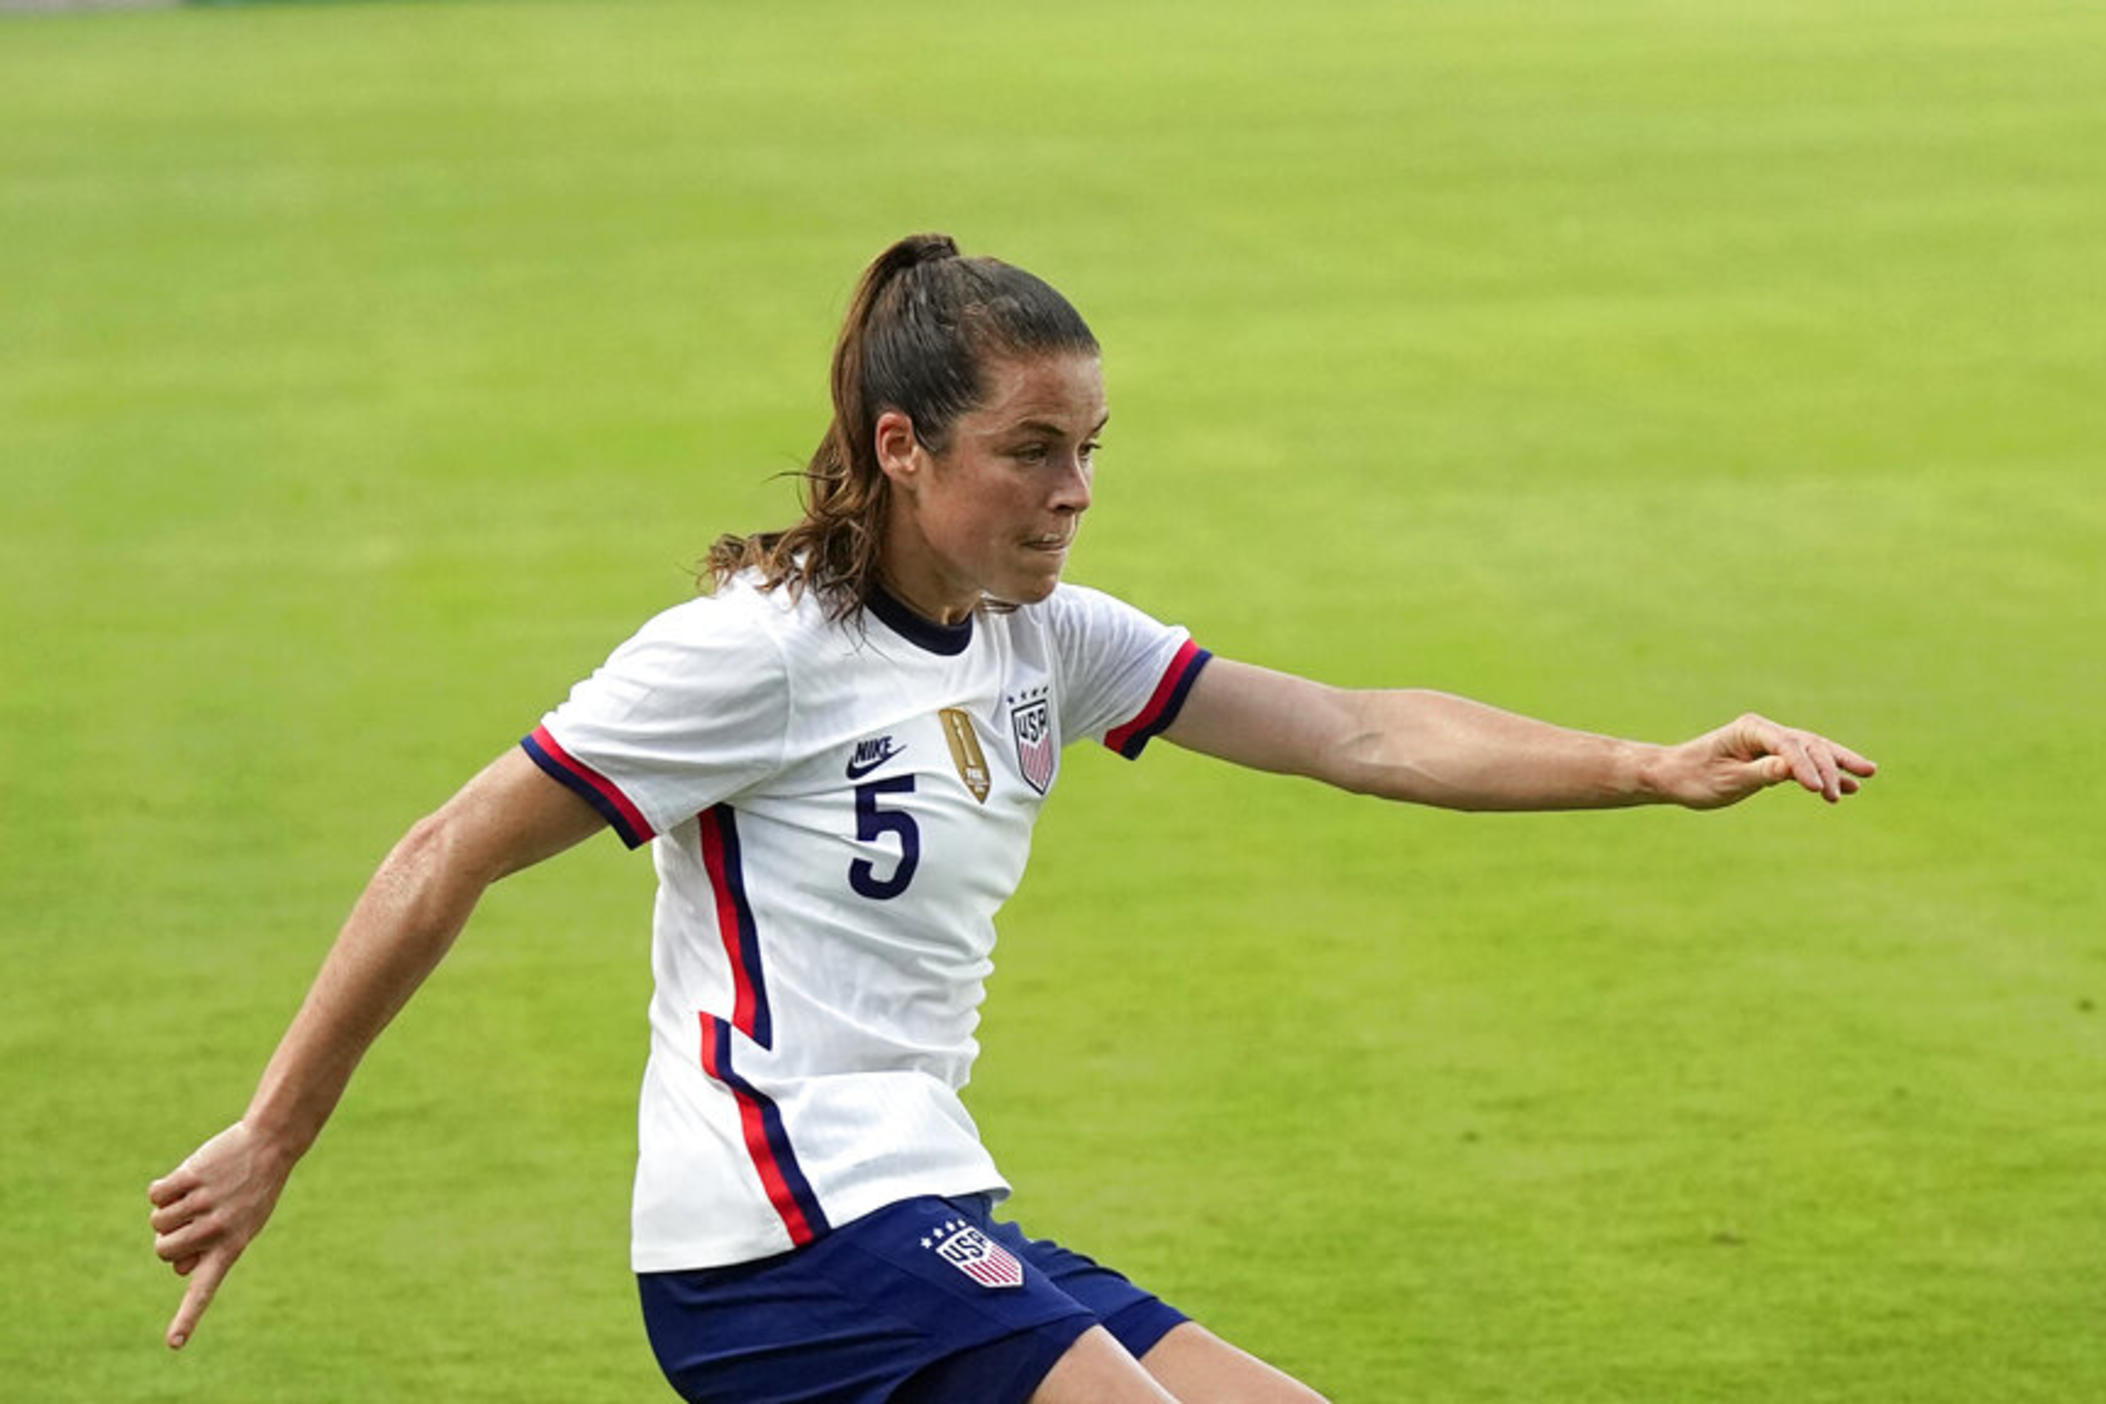 Kelley O'Hara (5) advances the ball during the first half of an international friendly soccer match against Portugal Thursday, June 10, 2021, in Houston. (AP Photo/David J. Phillip)